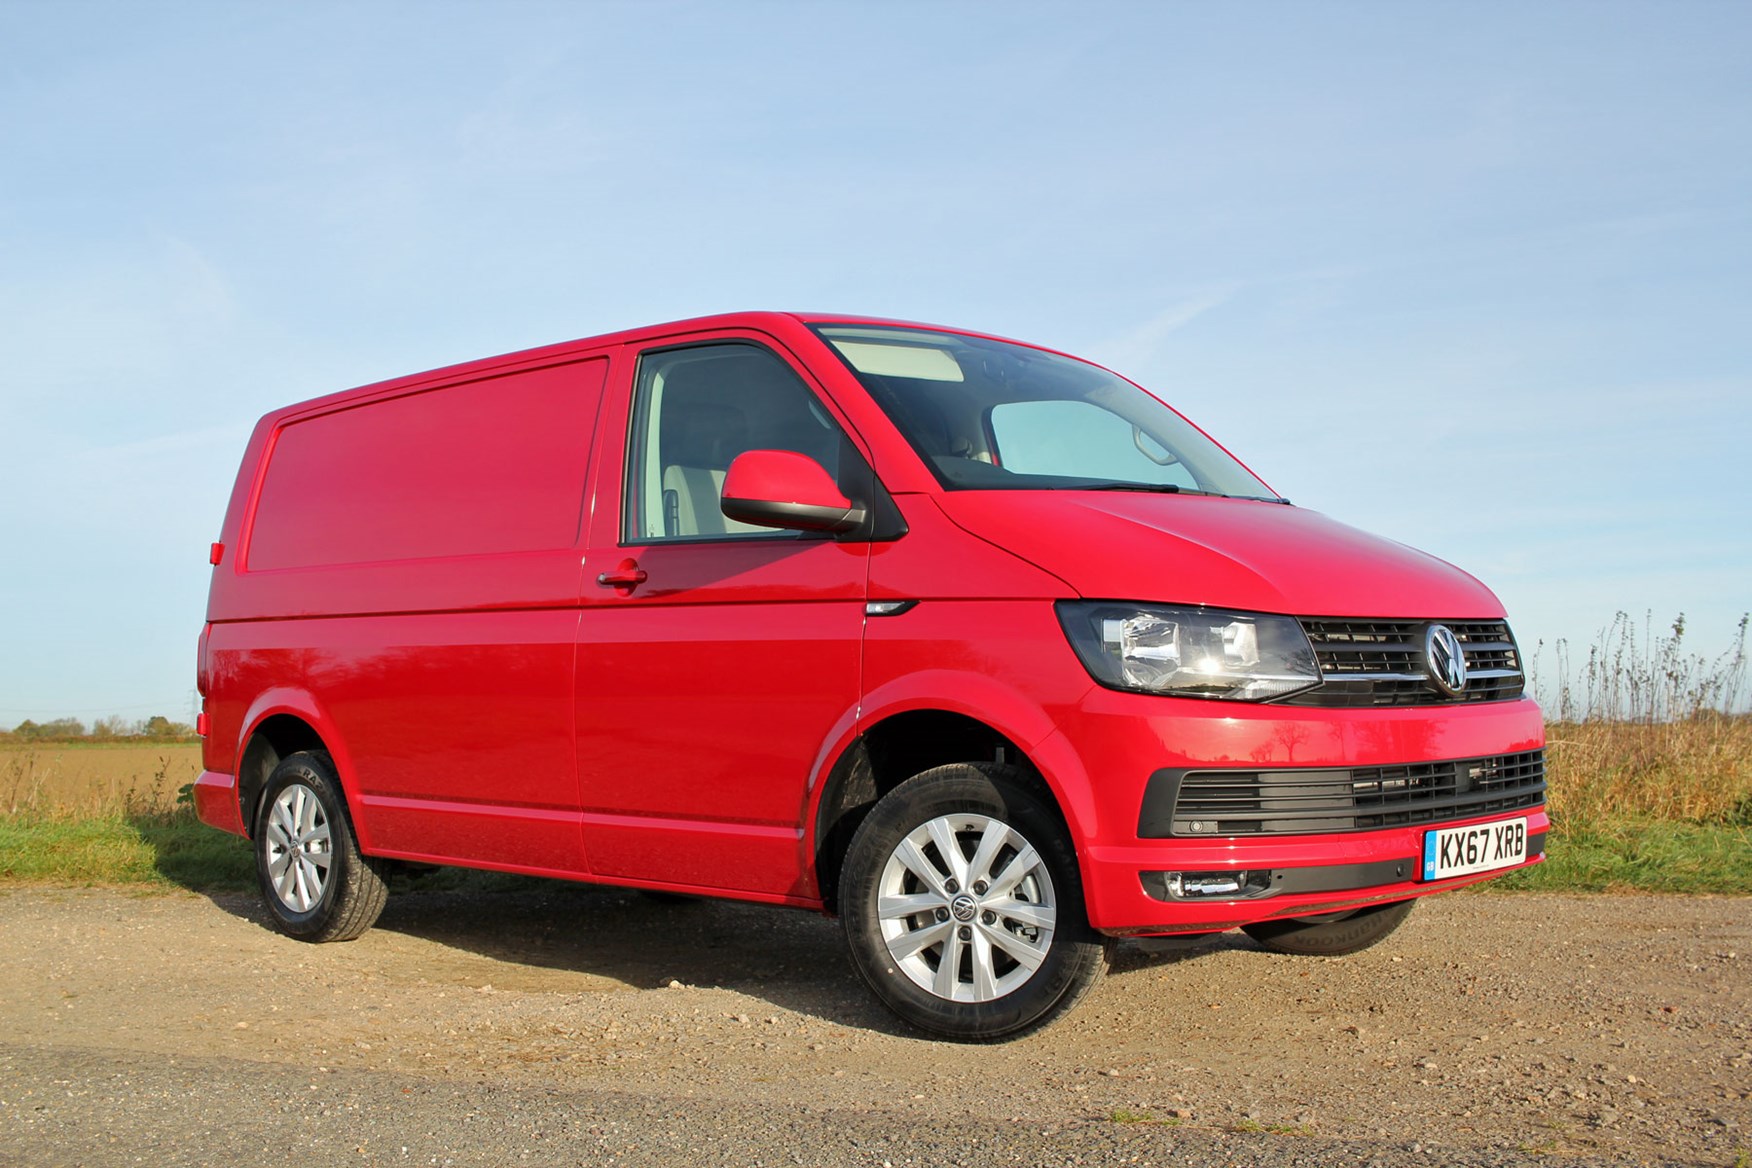 VW Transporter T6 TSI 150 review - front view, red